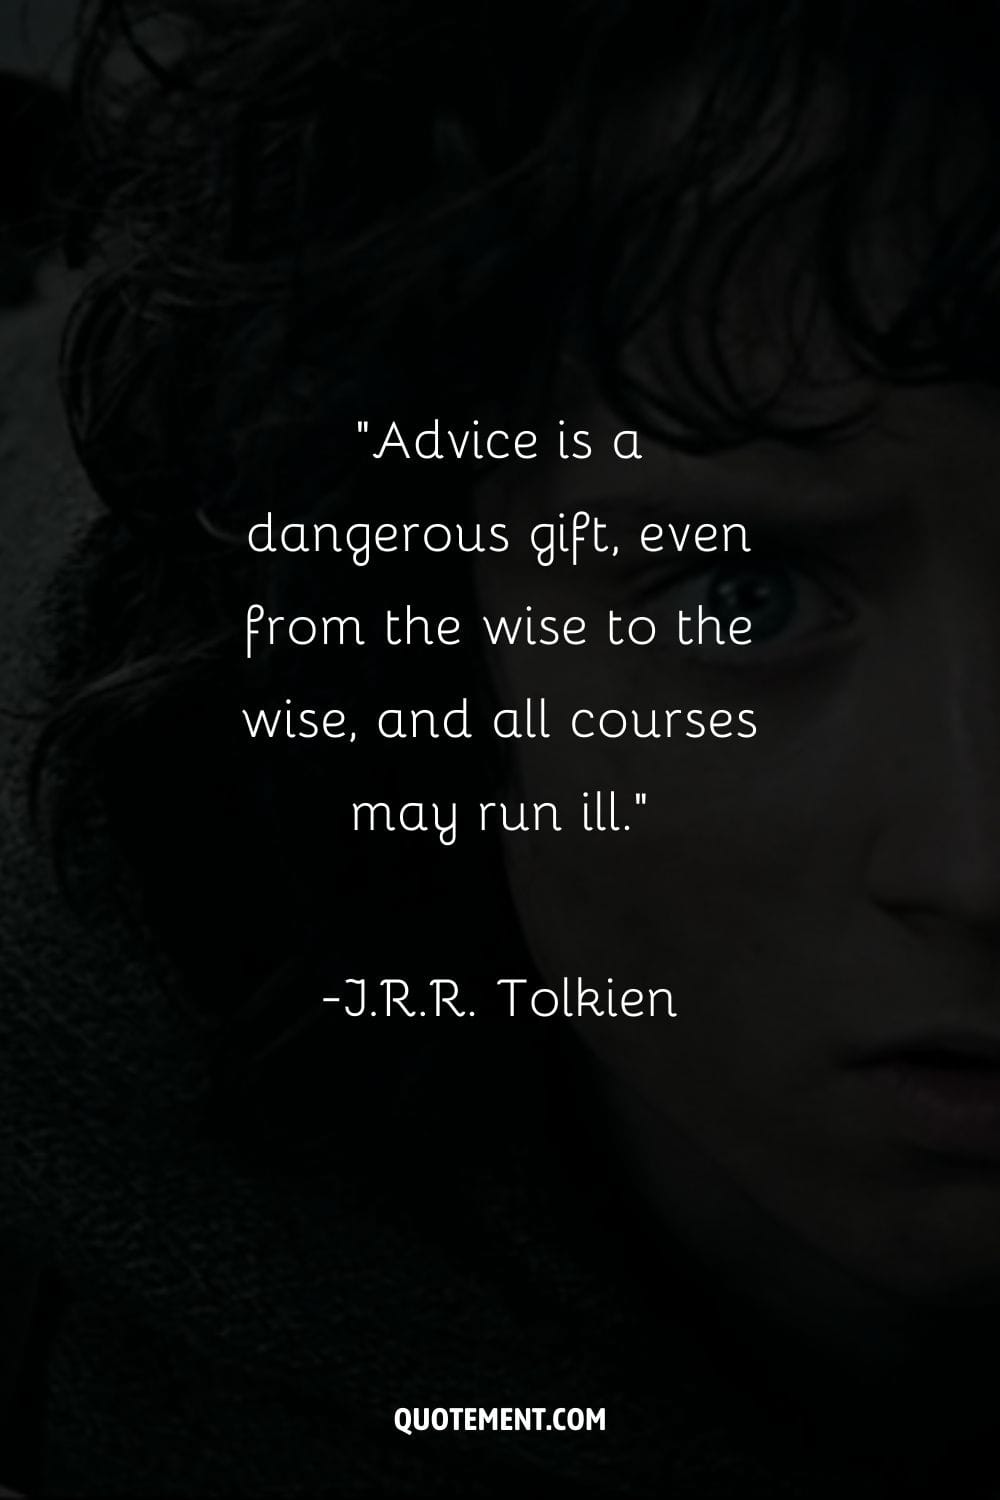 Advice is a dangerous gift, even from the wise to the wise, and all courses may run ill.